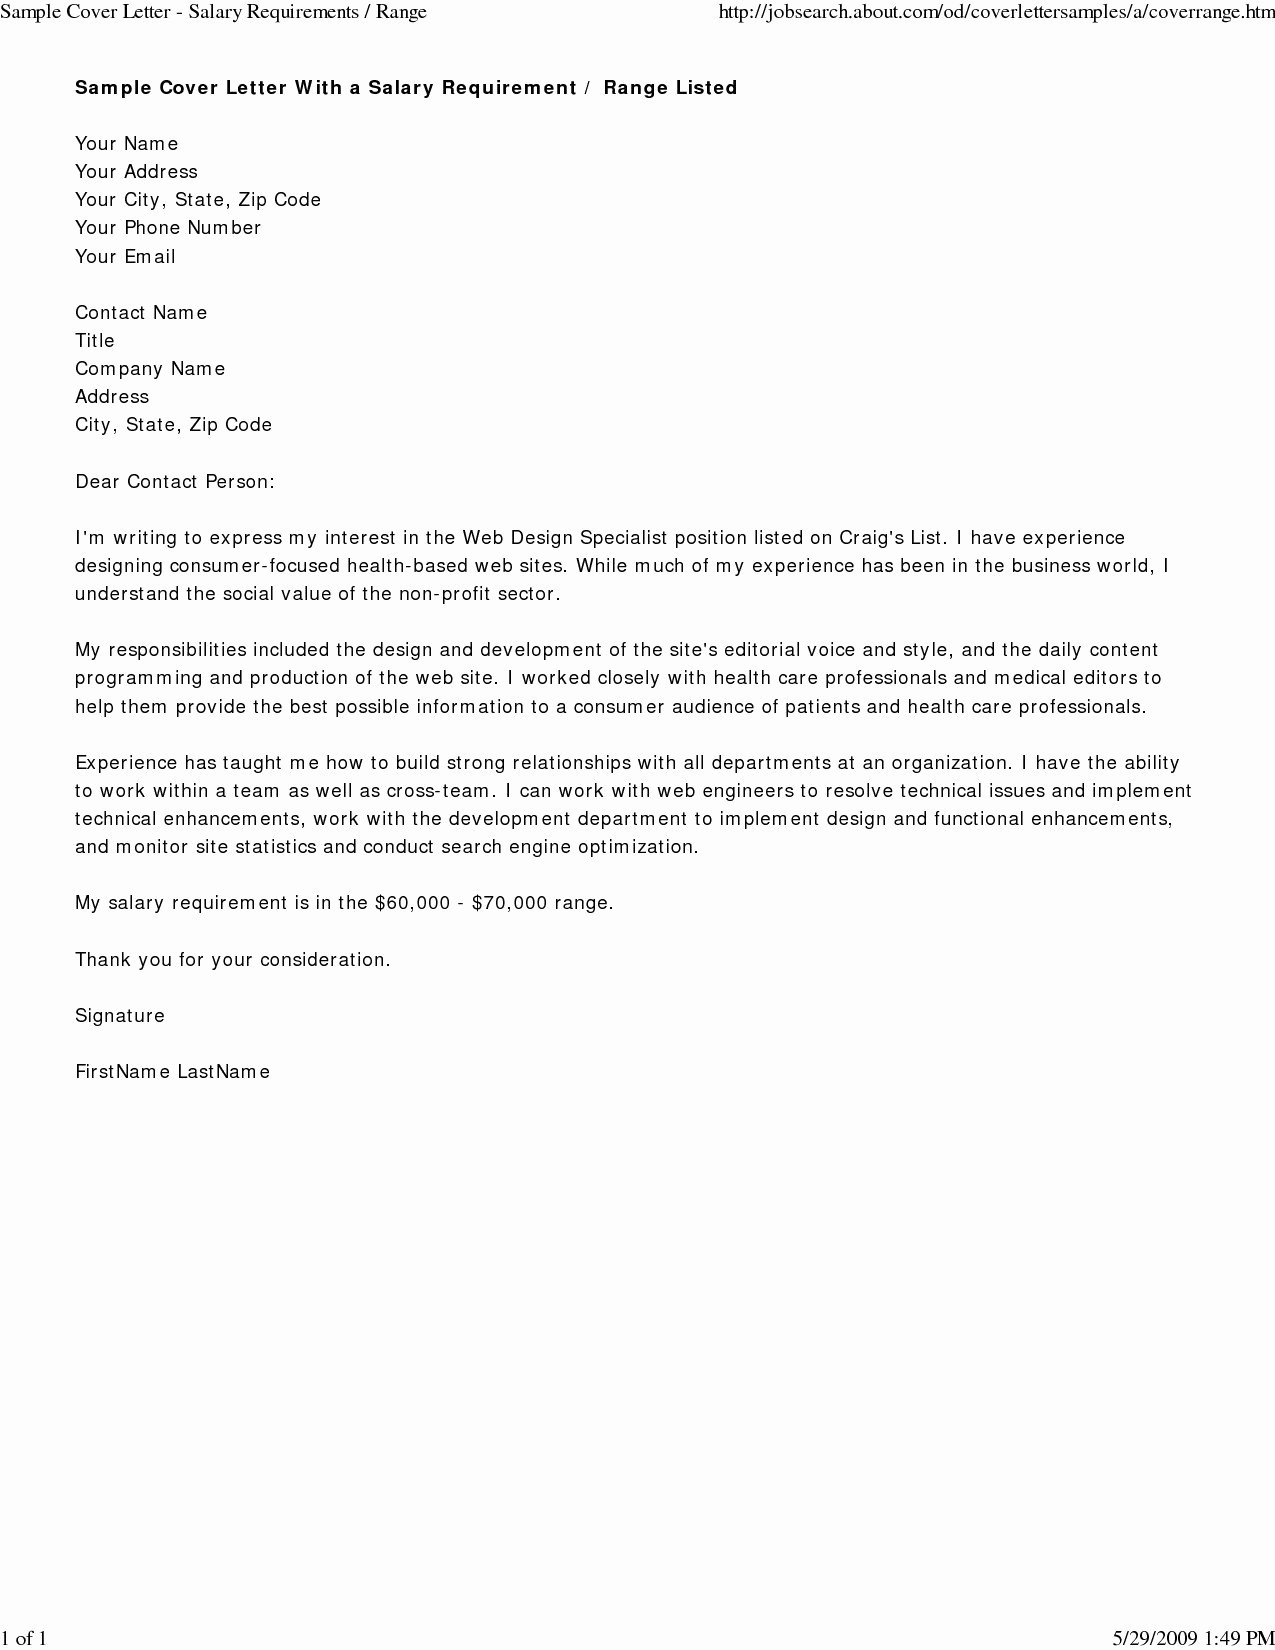 Reference Letter Template Word - Business Letter Writing topics Reference Letter Template Word